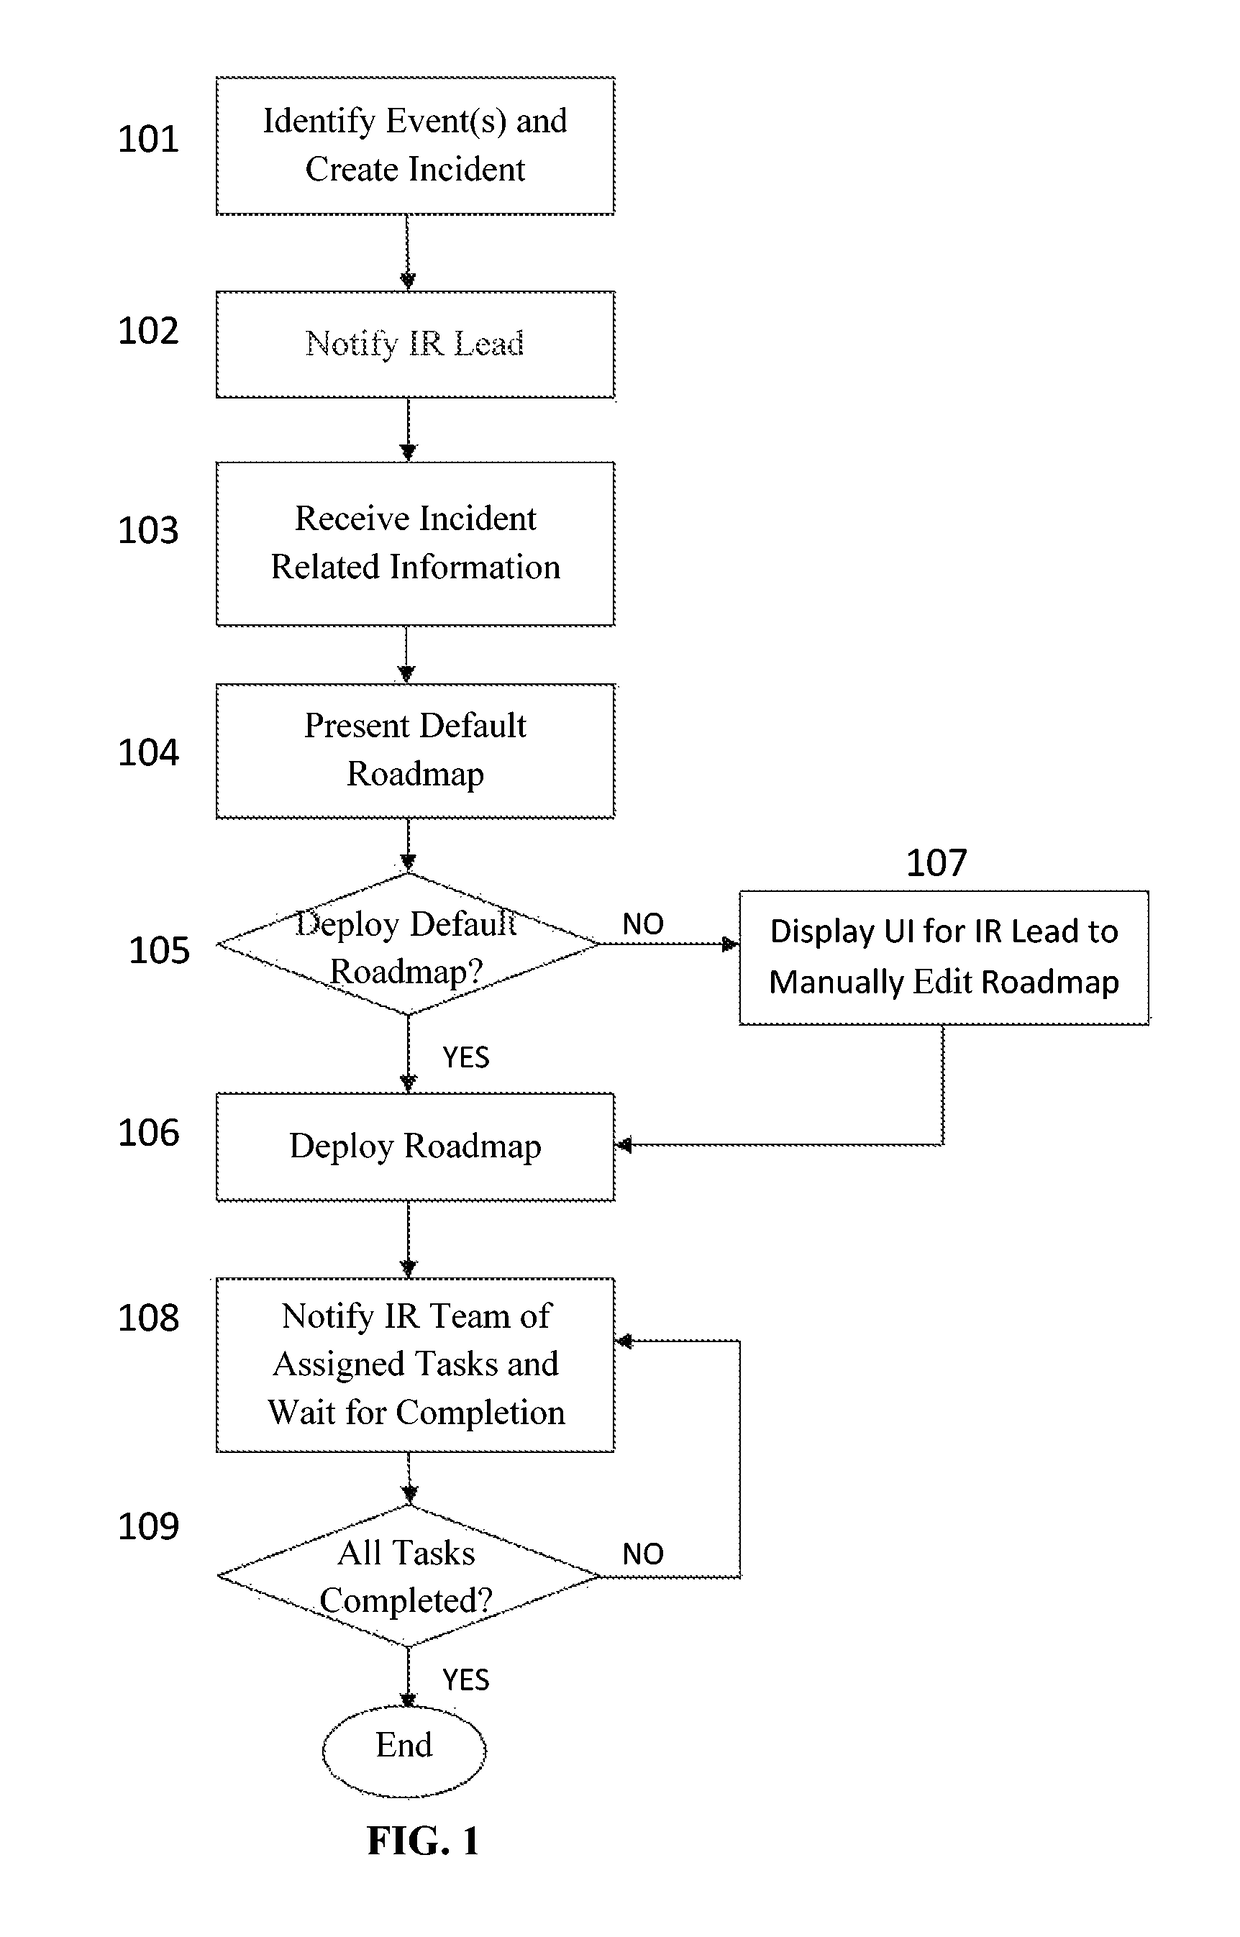 Real-time deployment of incident response roadmap